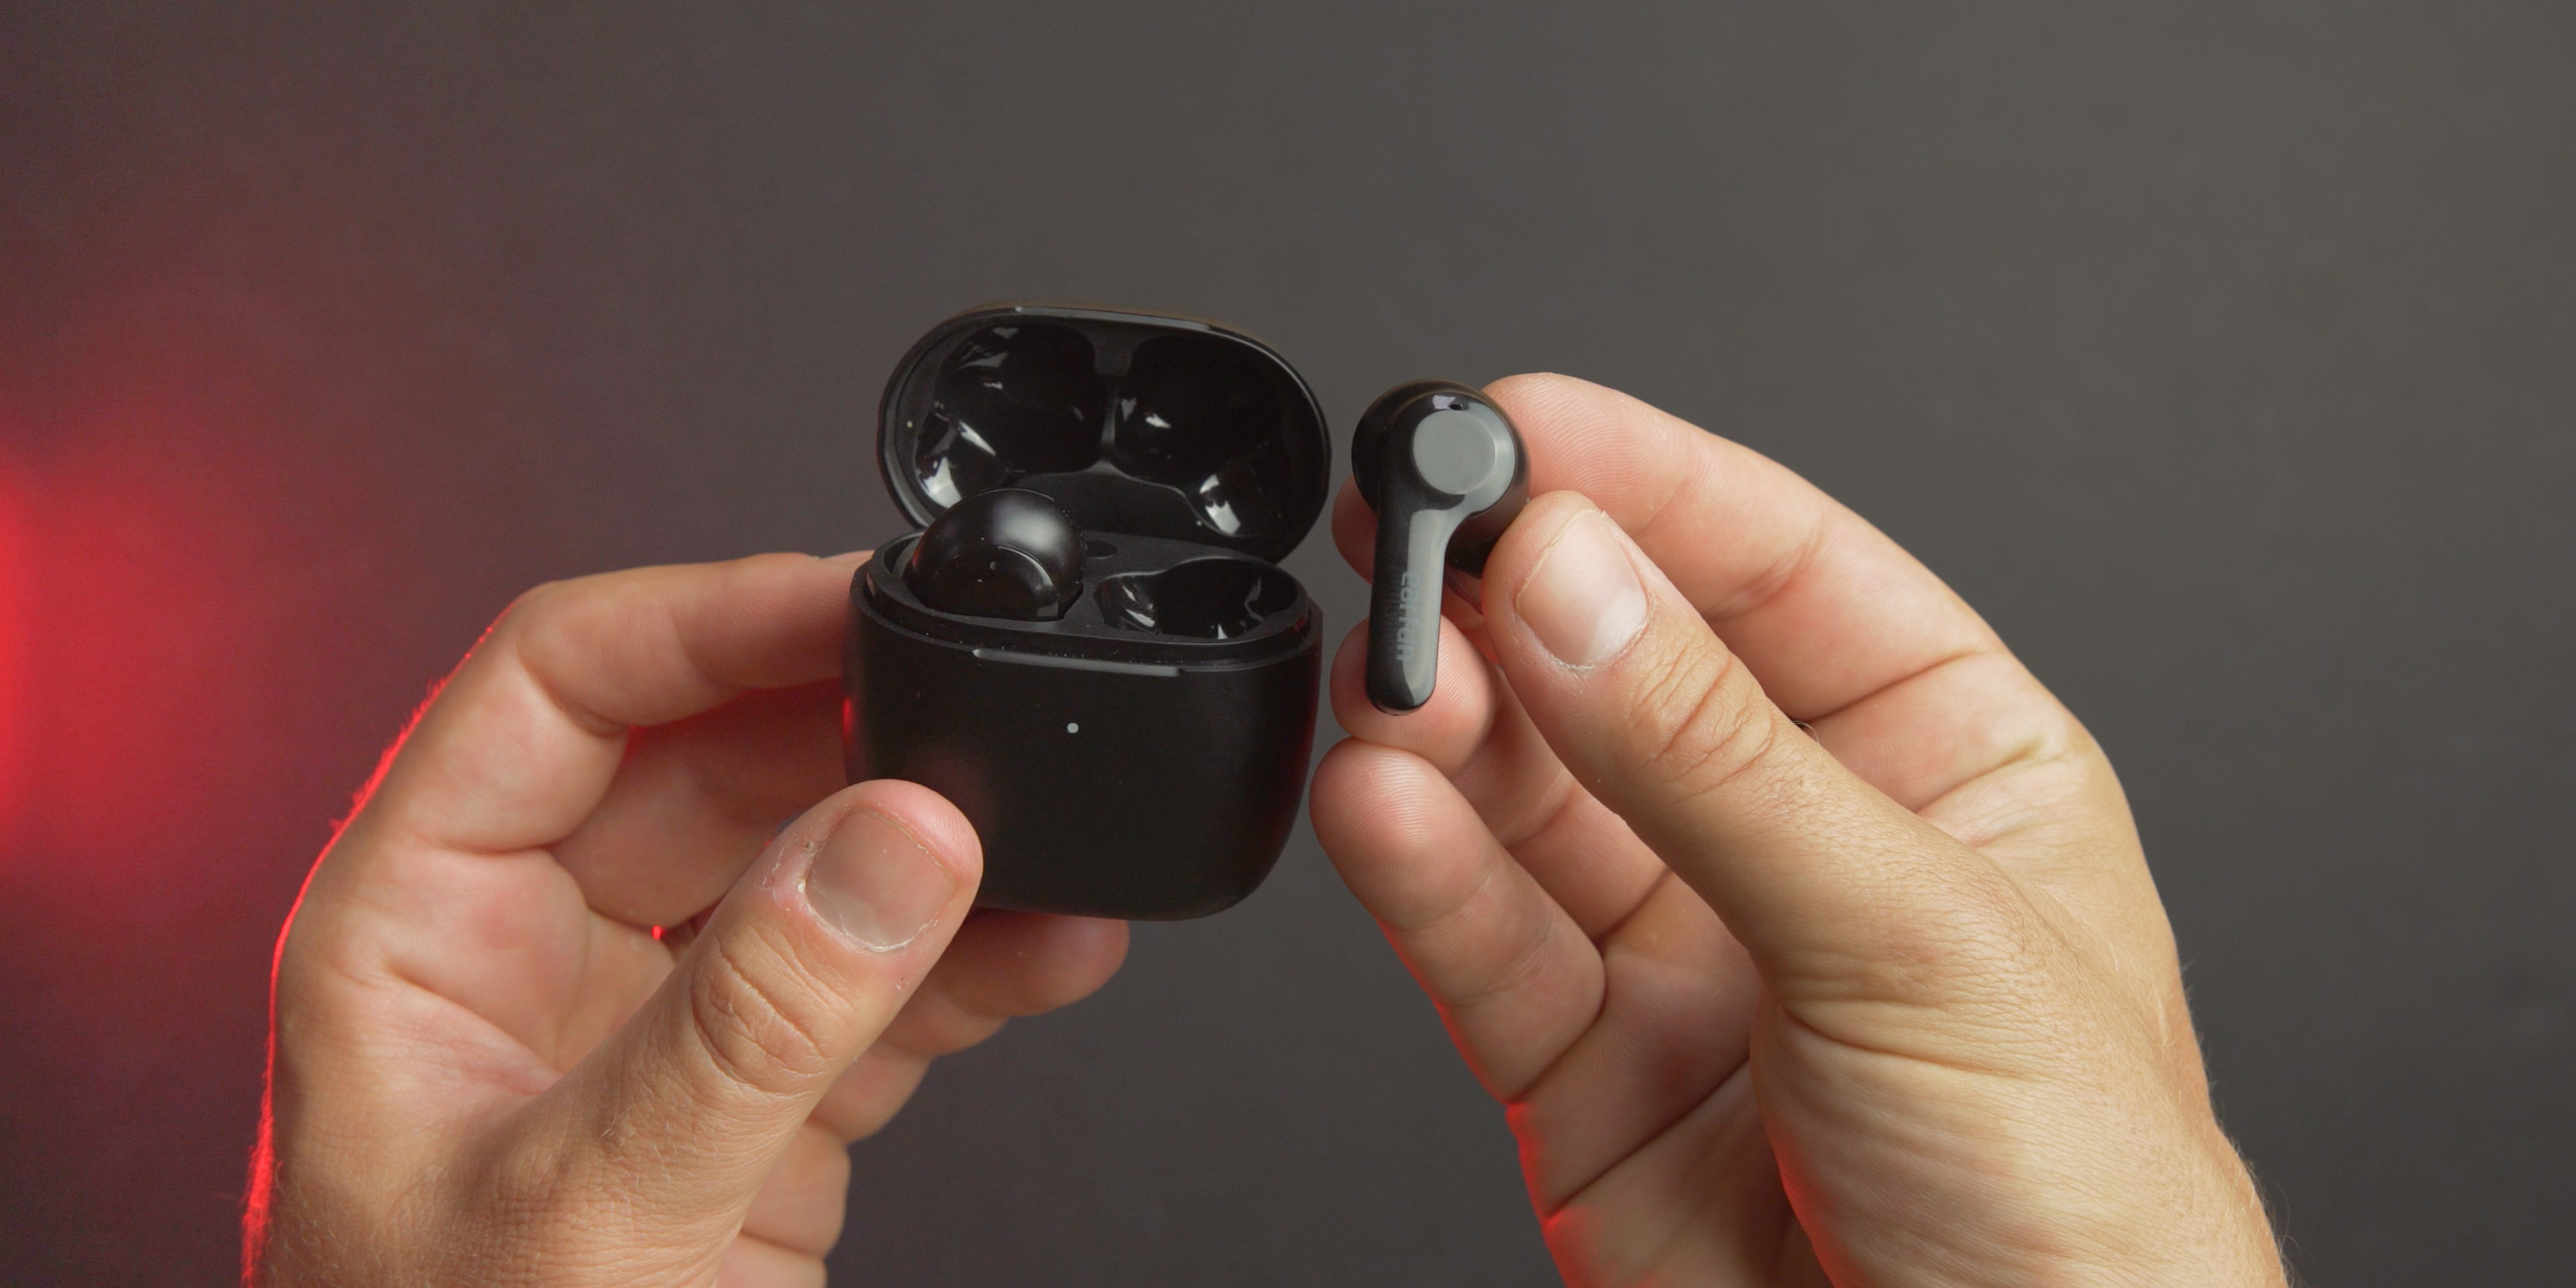 Holding the EarFun Air earbud next to its charging case